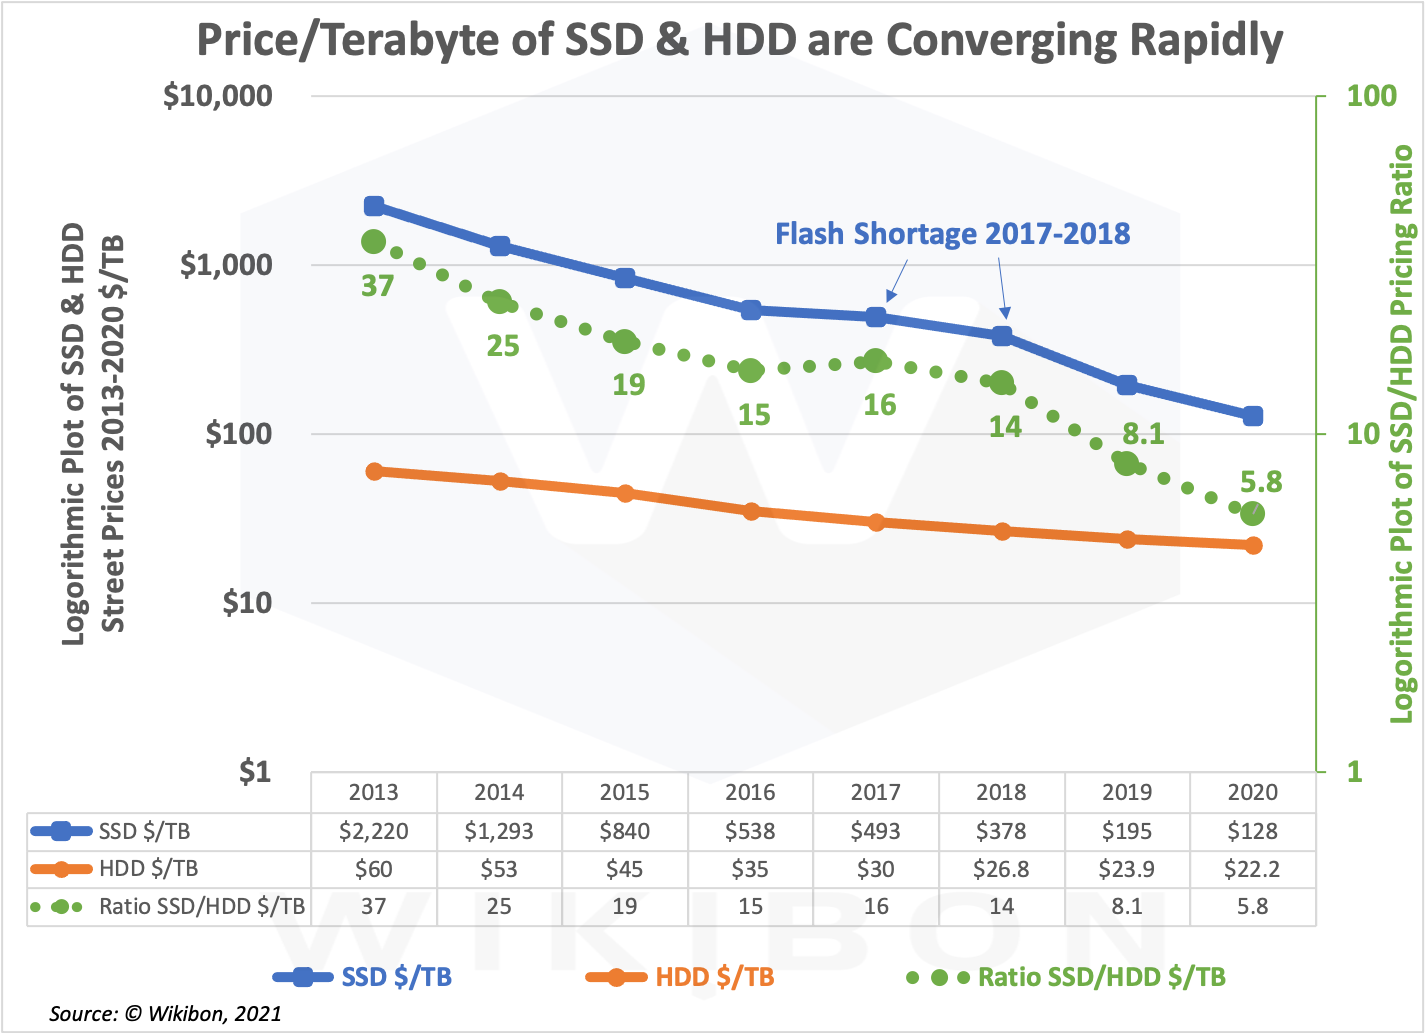 Wright's Law: Historical HDD & SSD Pricing